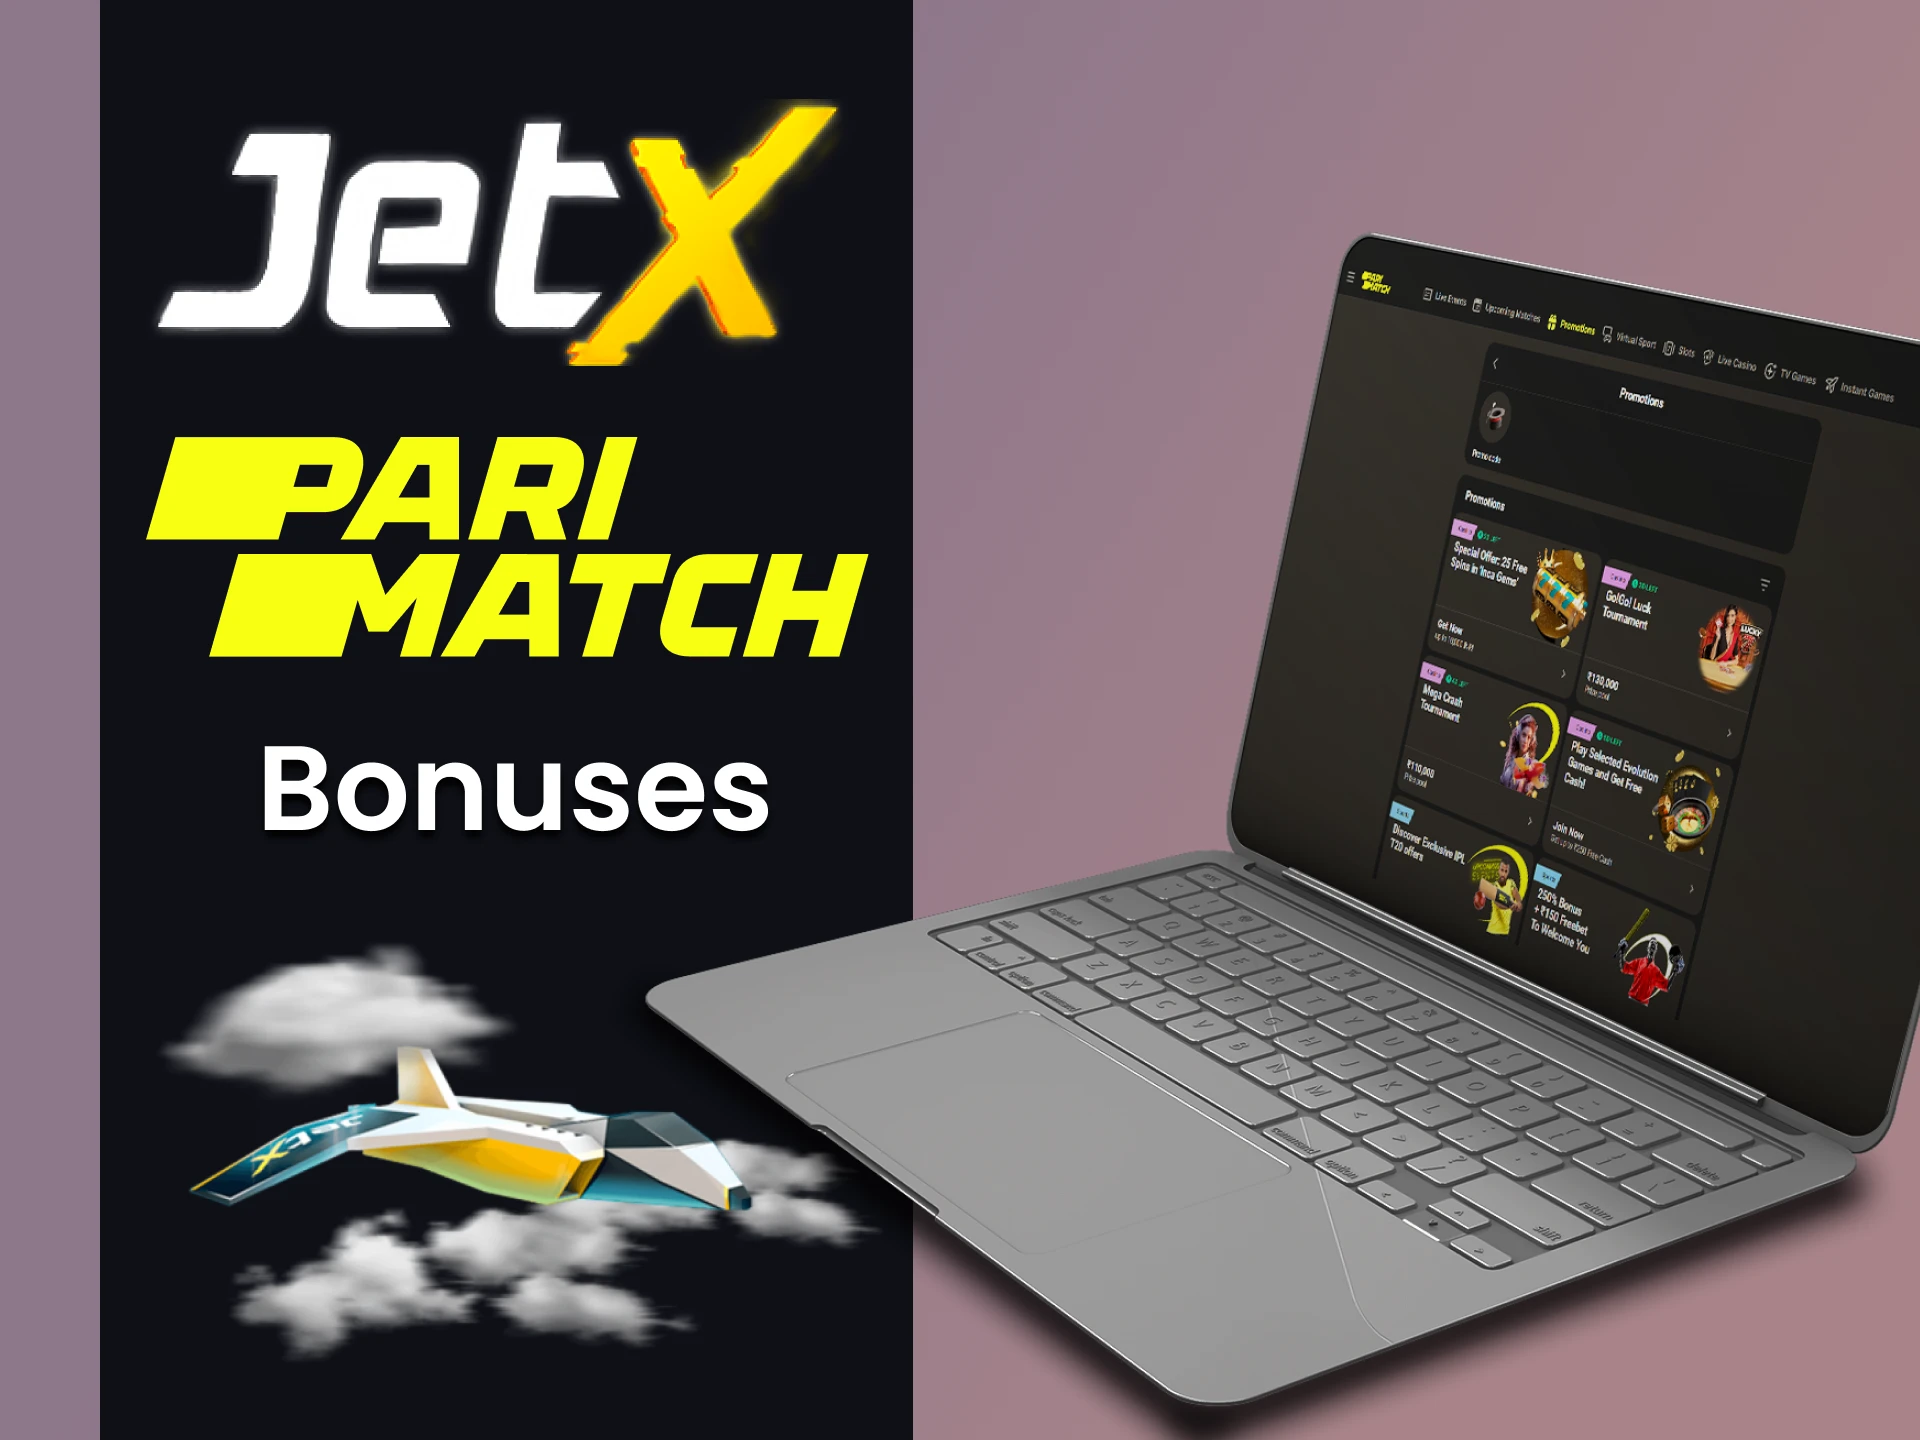 Parimatch gives bonuses for playing JetX.